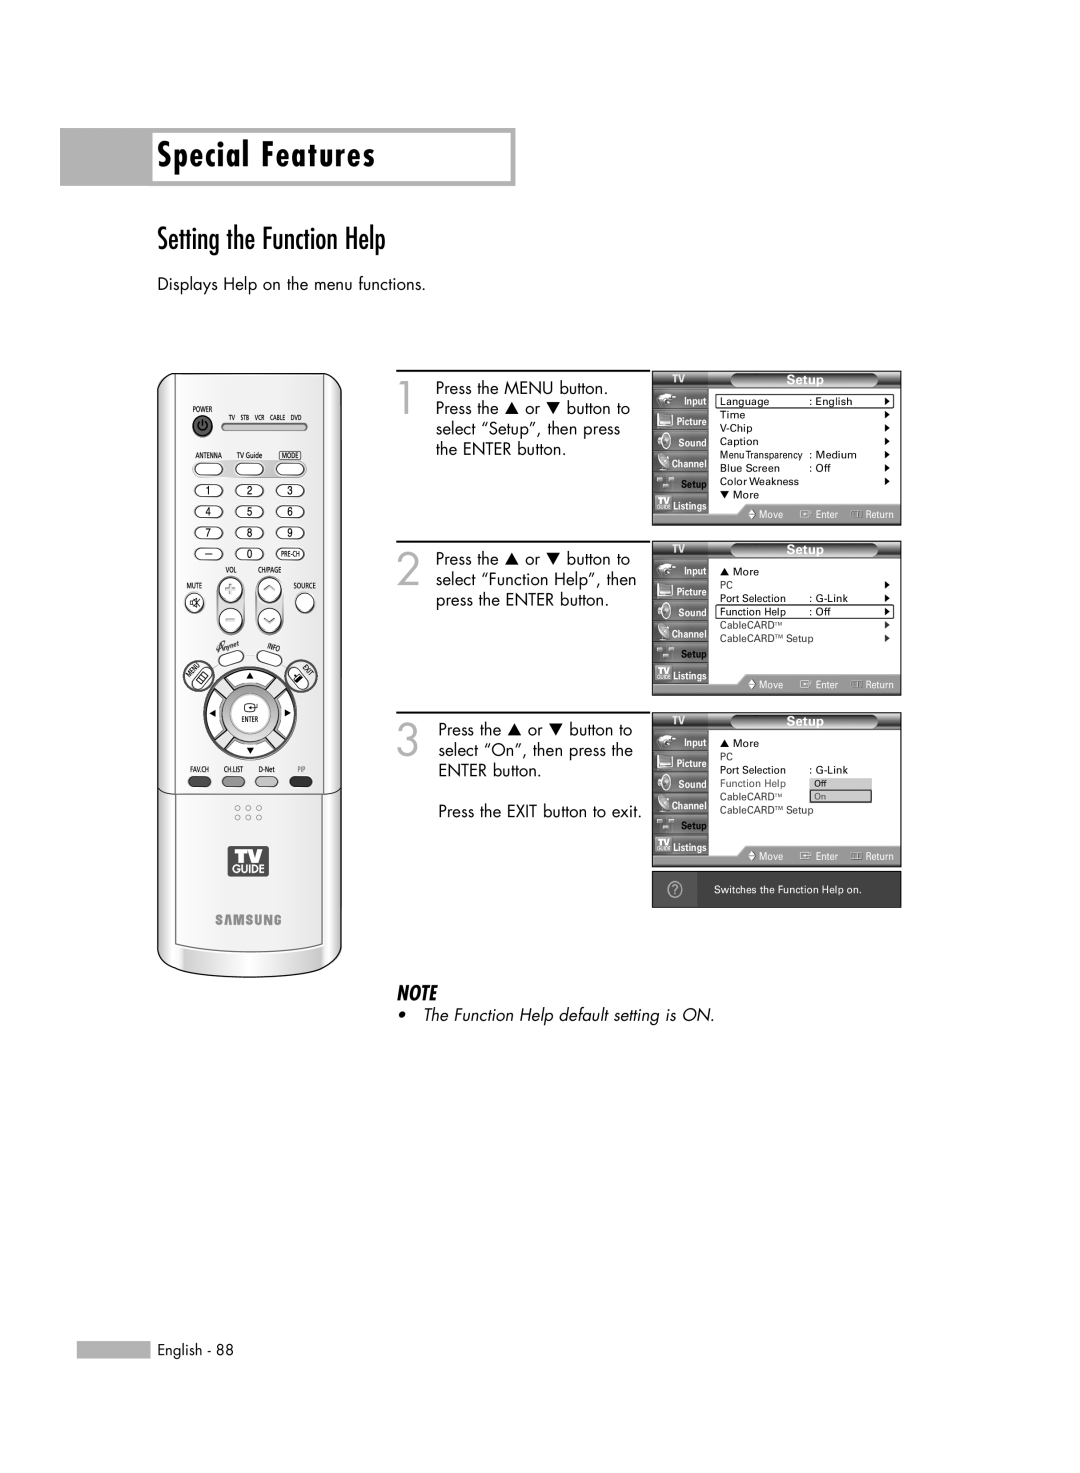 Samsung HL-R5688W manual Special Features, Setting the Function Help, Move, Enter, Return, CableCARDTM Setup 